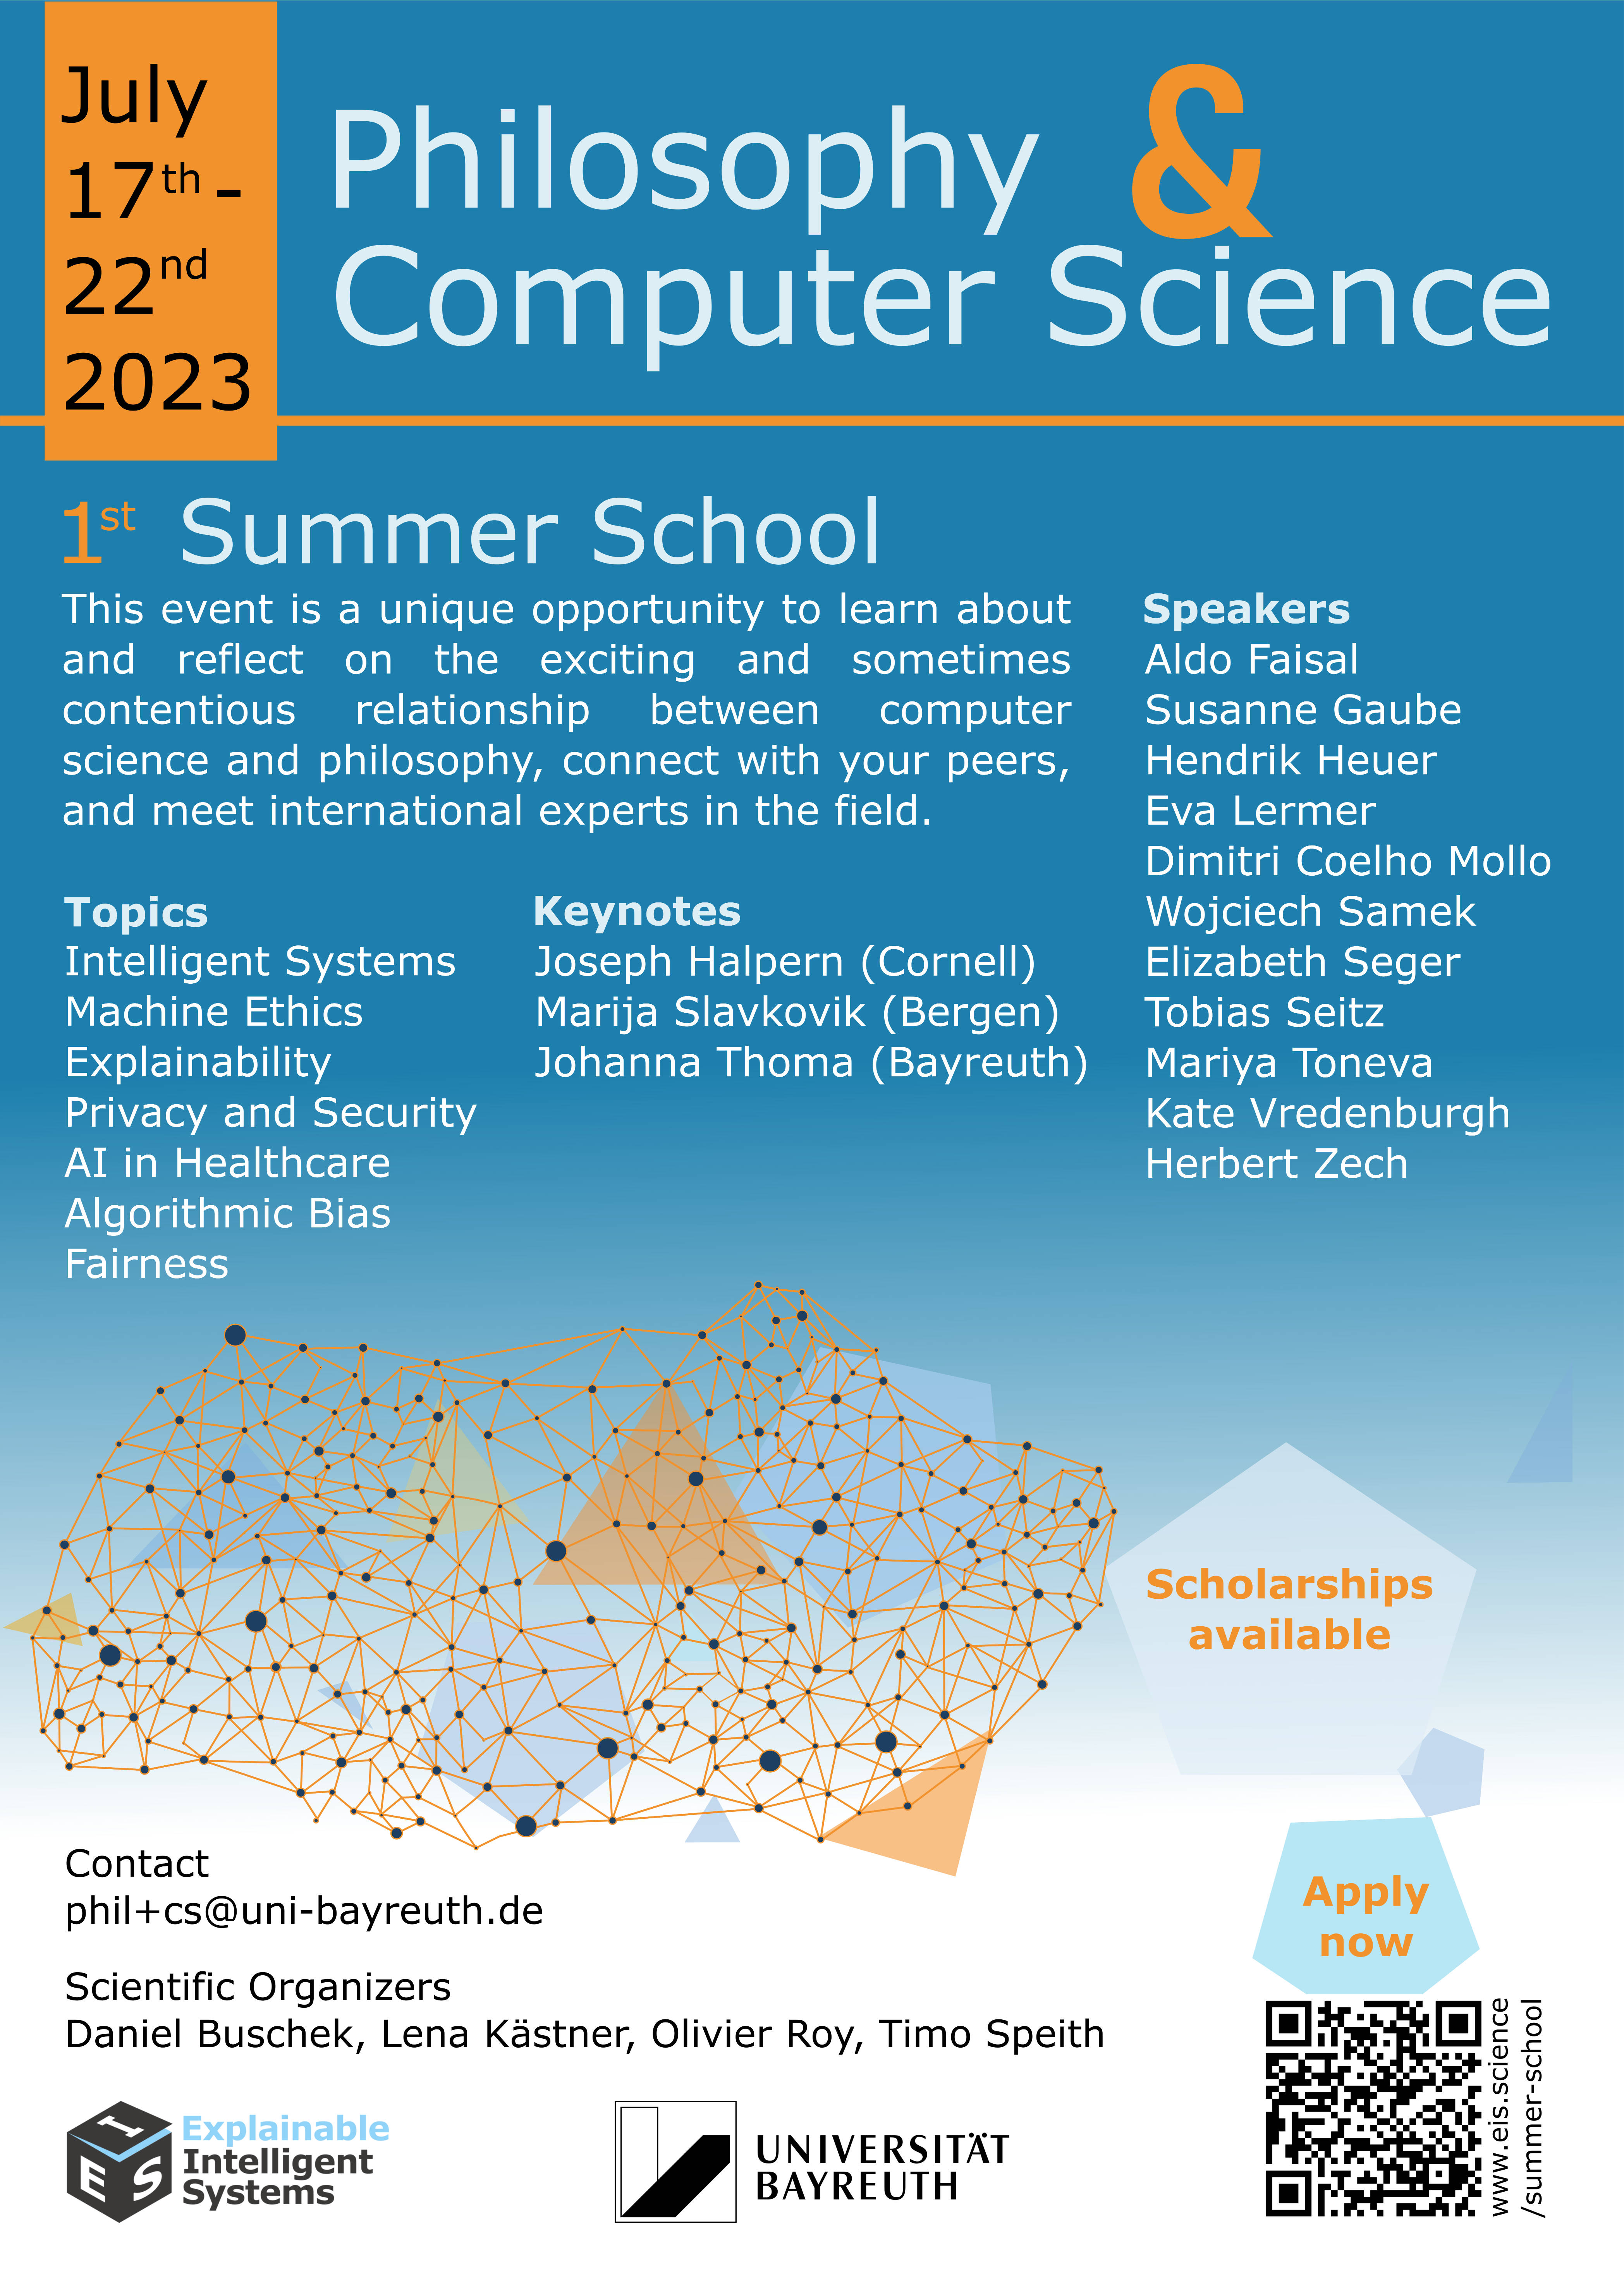 The official poster for the 1st Bayreuth Philosophy & Computer Science Summer School